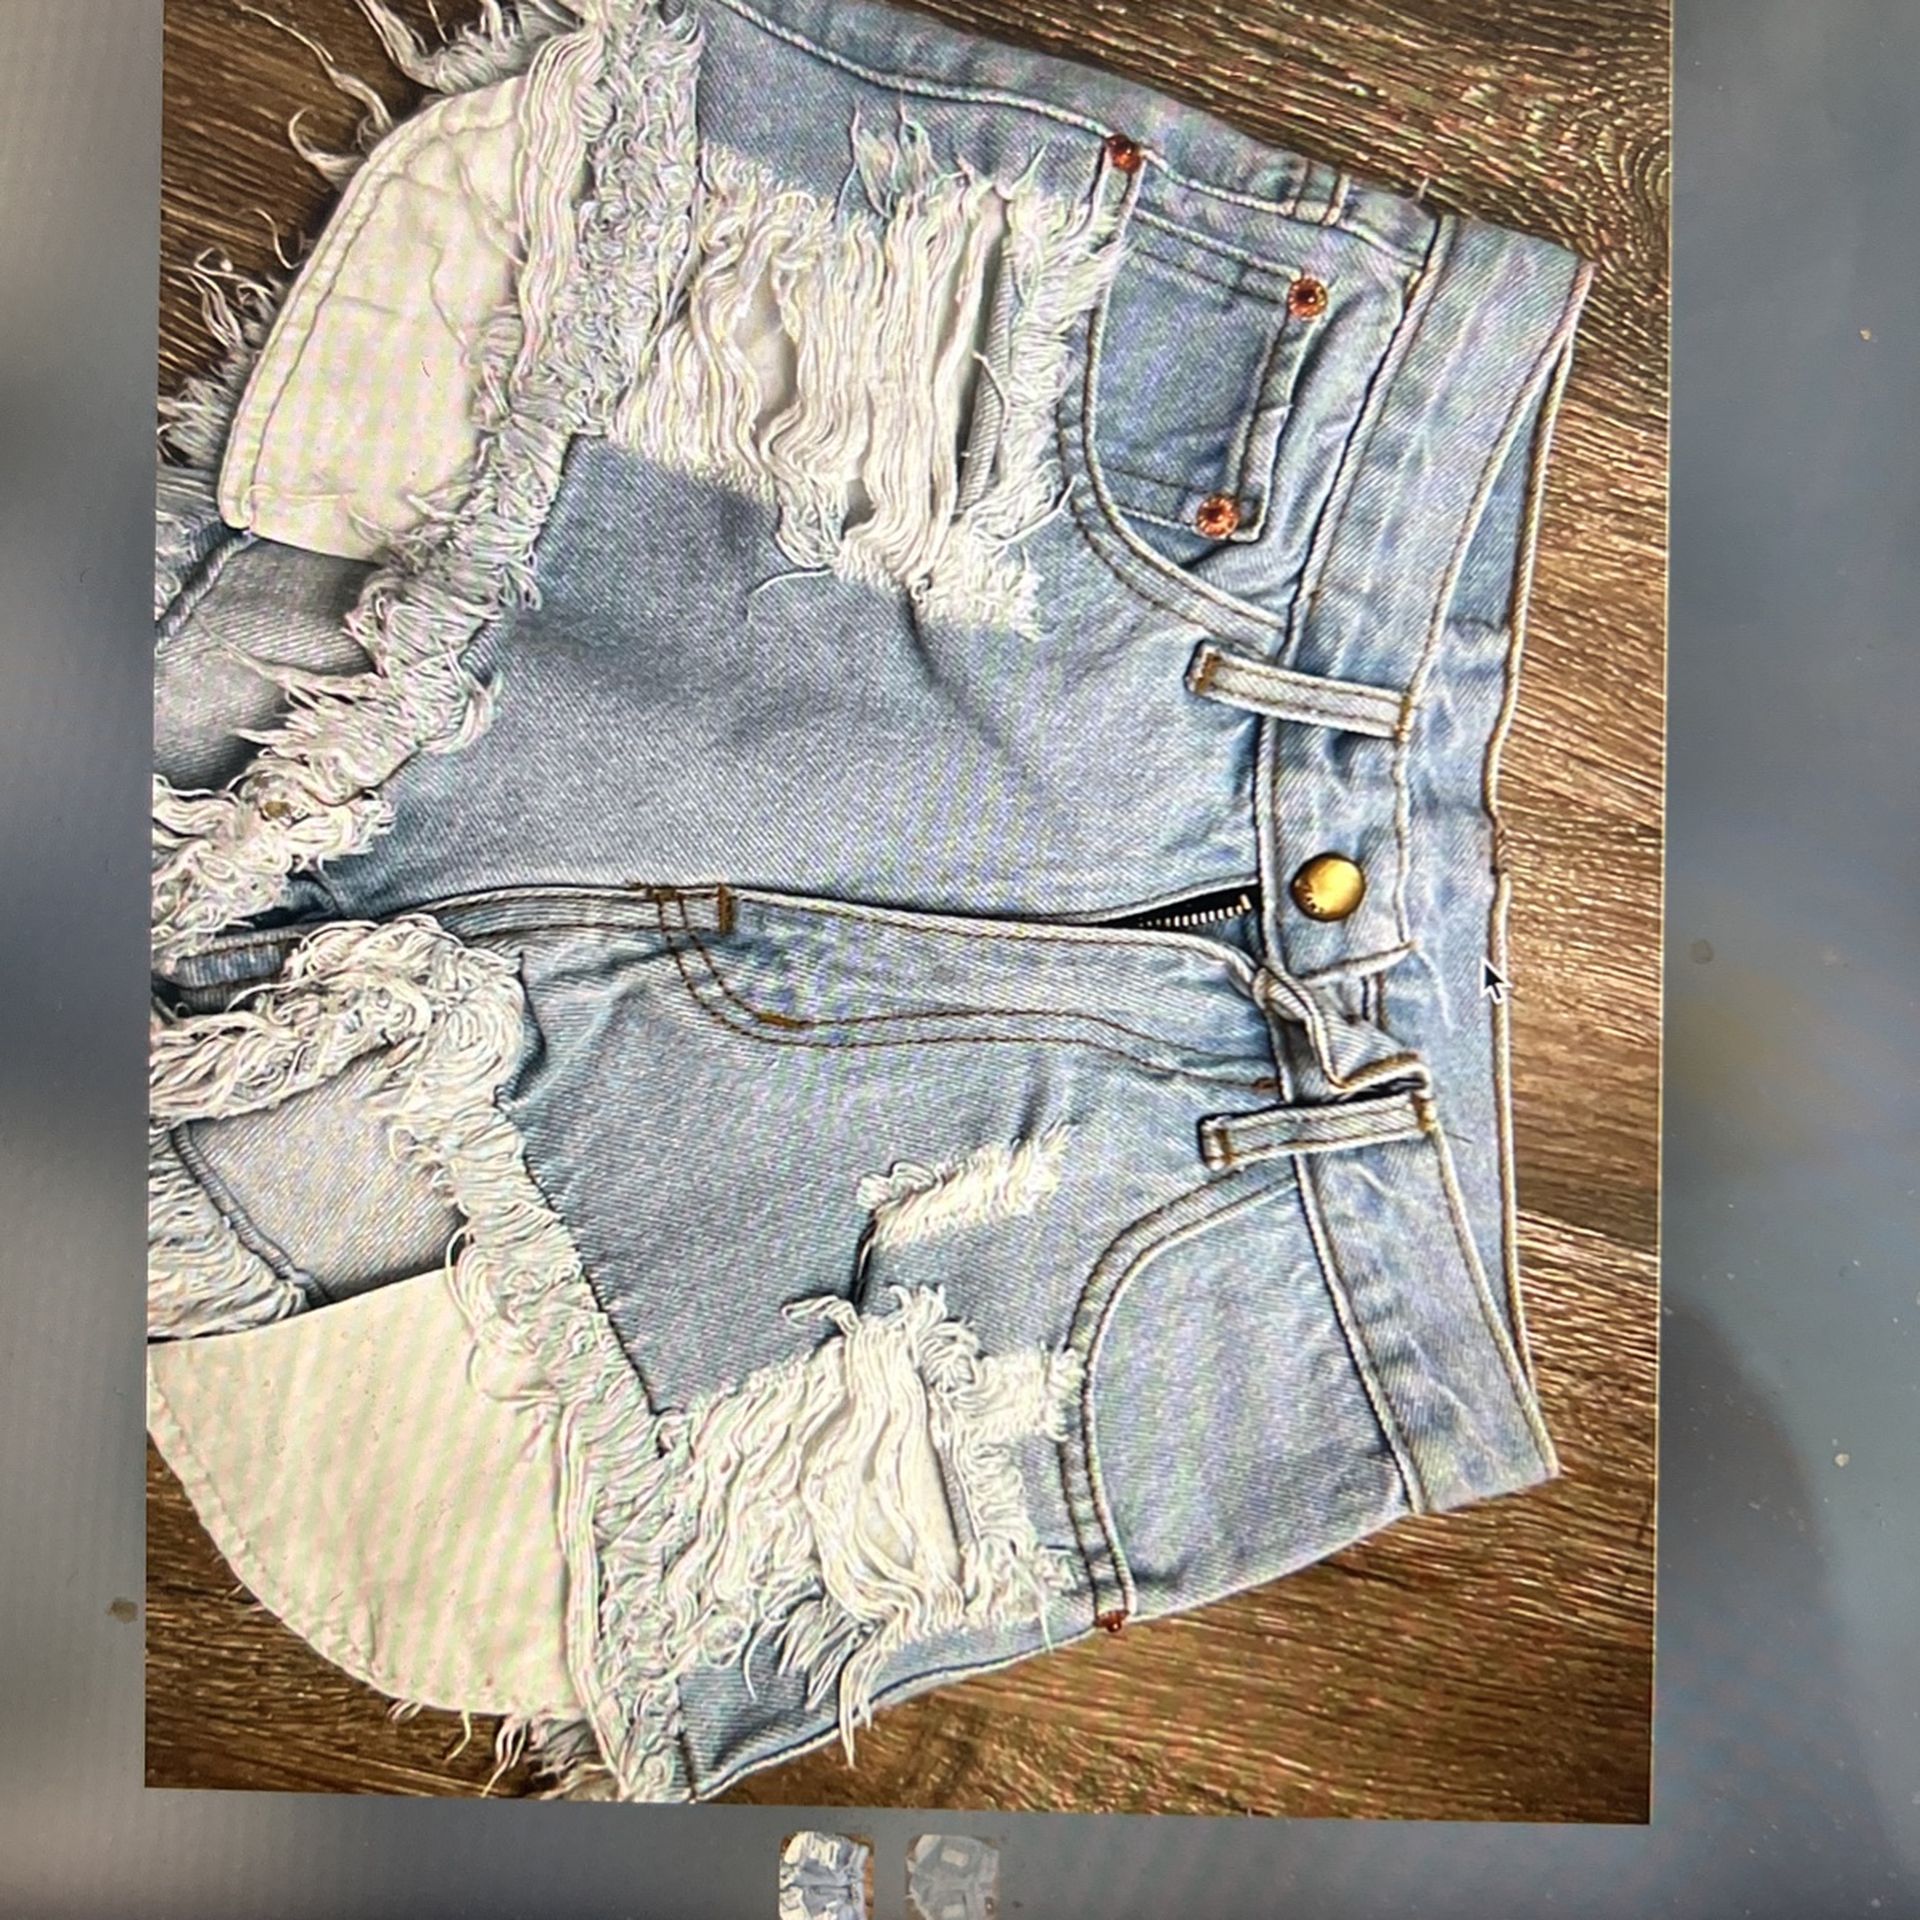 Jean Shorts Size Small